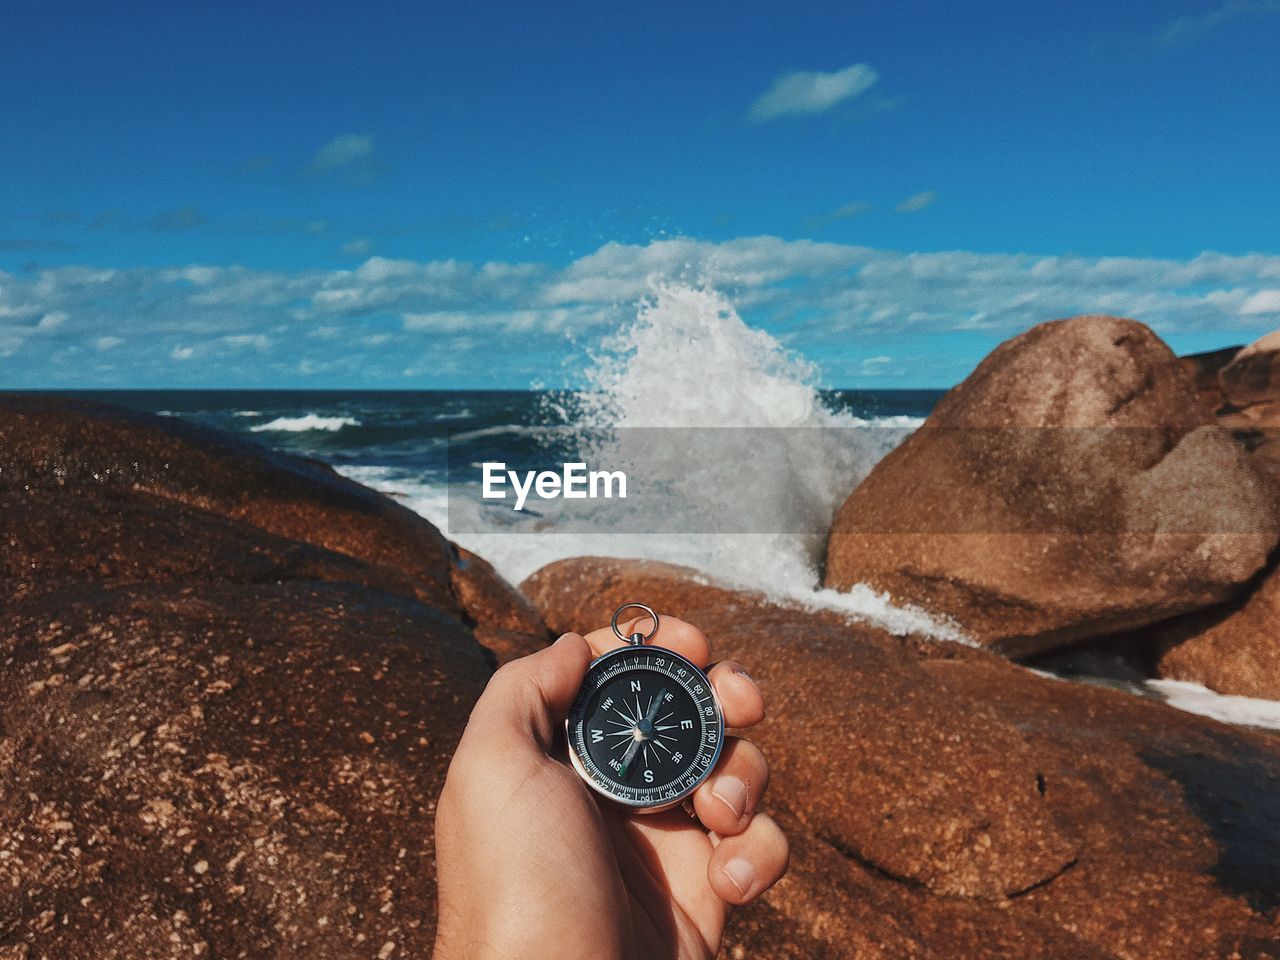 Cropped image of person holding navigational compass against rocky shore